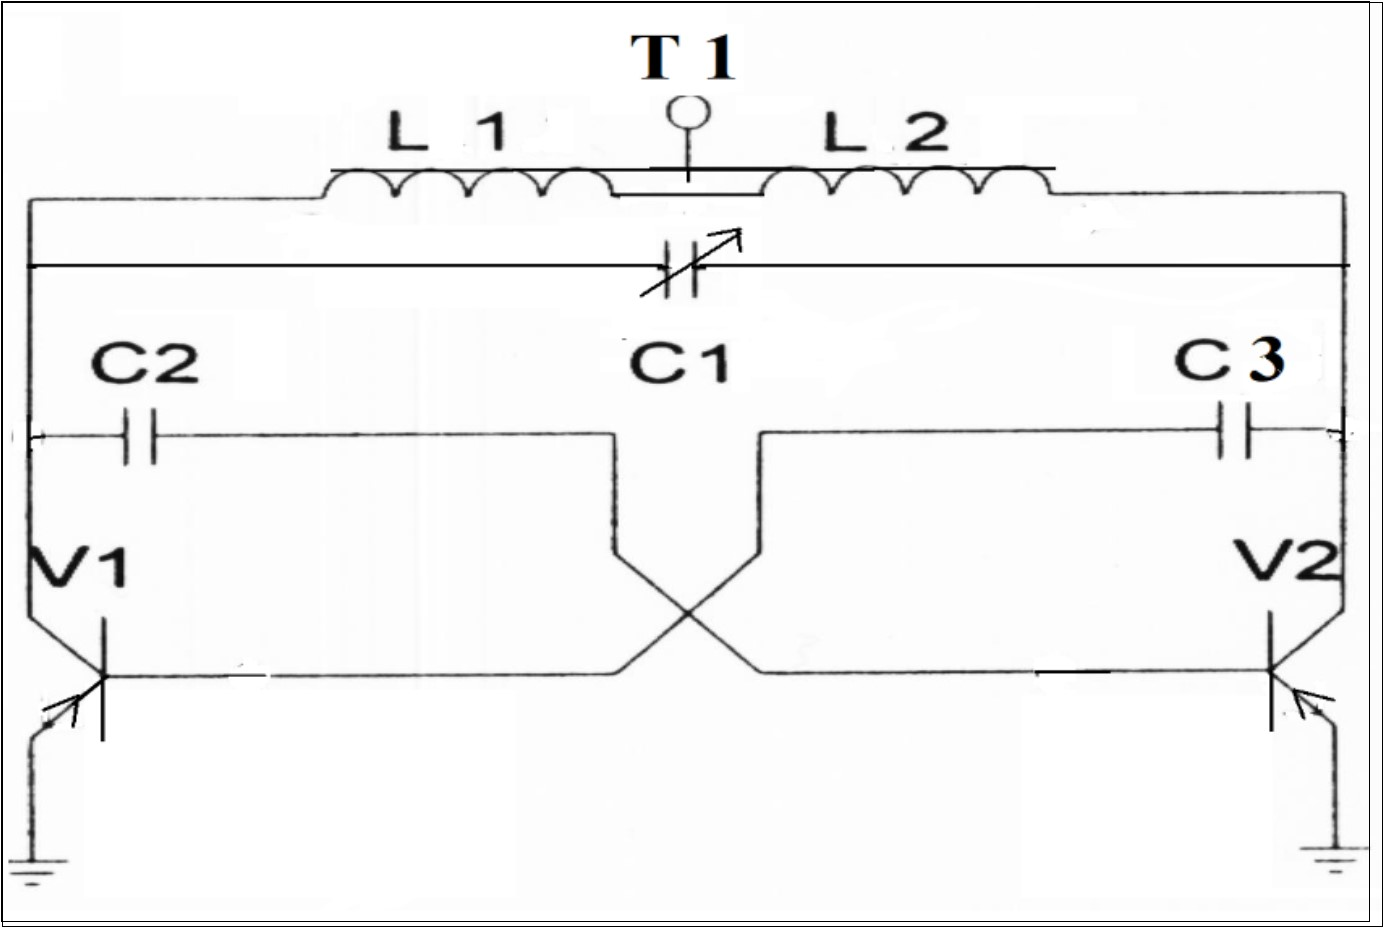  Electronic circuit physically modeling system (7). T1- standard fly back transformer with a closed                   ferrite core L1  has  12 turns, L2has 400 turns, C1  - air variable capacitor, C2 - 800 pF, C3 -0.25 μF, V1 V2 - transistors of NTE33 type.